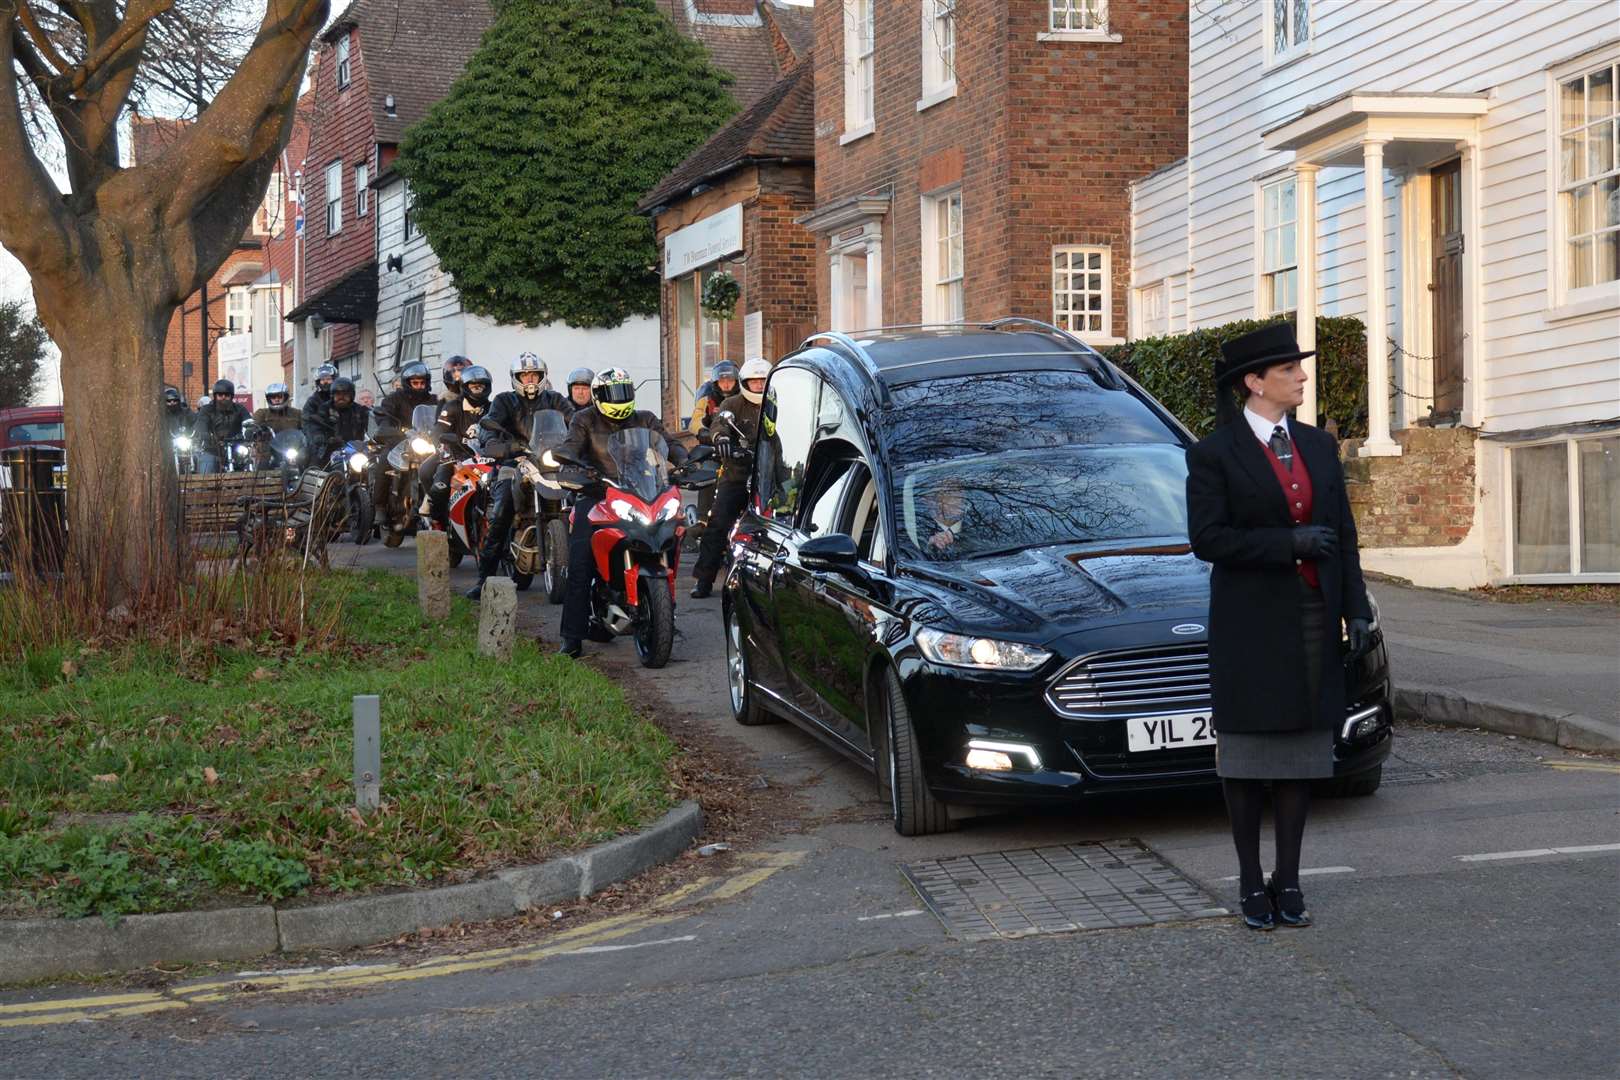 Bikers followed the hearse from Tonbridge for Brian Jenner's funeral at Tunbridge Wells Crematorium on Friday. Picture: Chris Davey